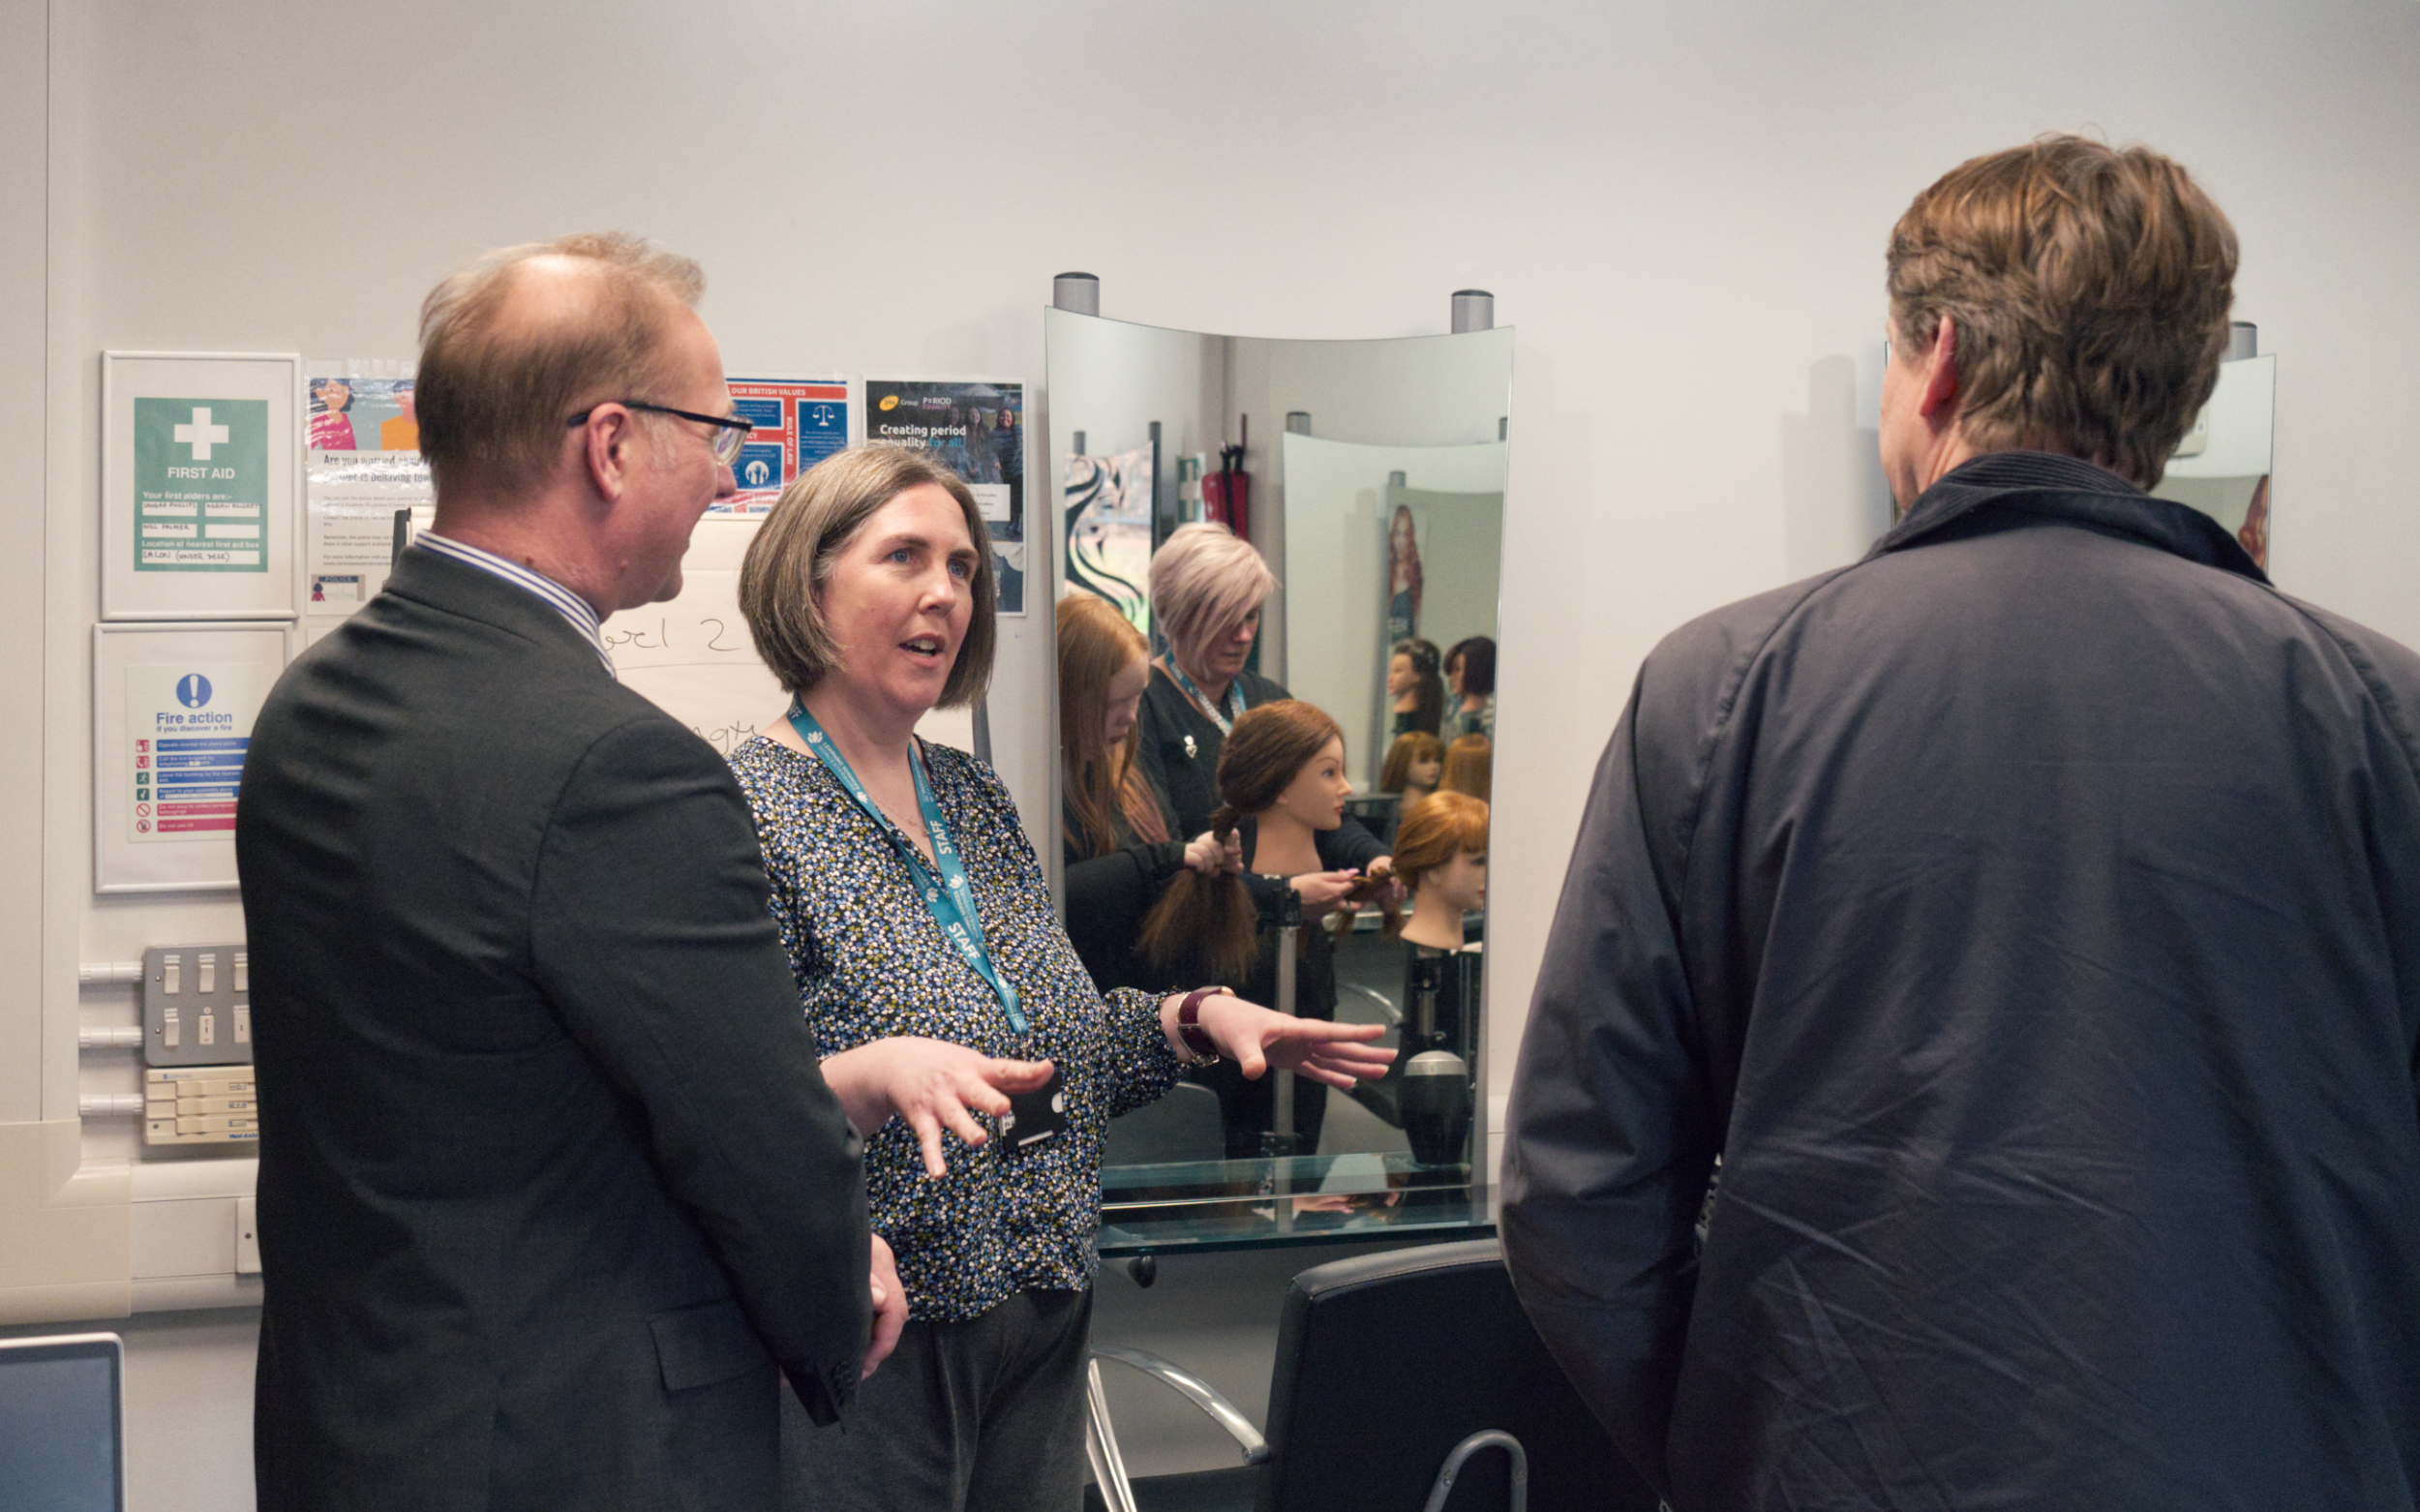 Councillor Marc Bayliss, Anna Lee & Robin Walker MP talk in Fairfield Learning Centre Hair Salon while a learner is seen working in a mirrors reflection. Image taken by Young Adult Learning Worcestershire student Oli Louch.